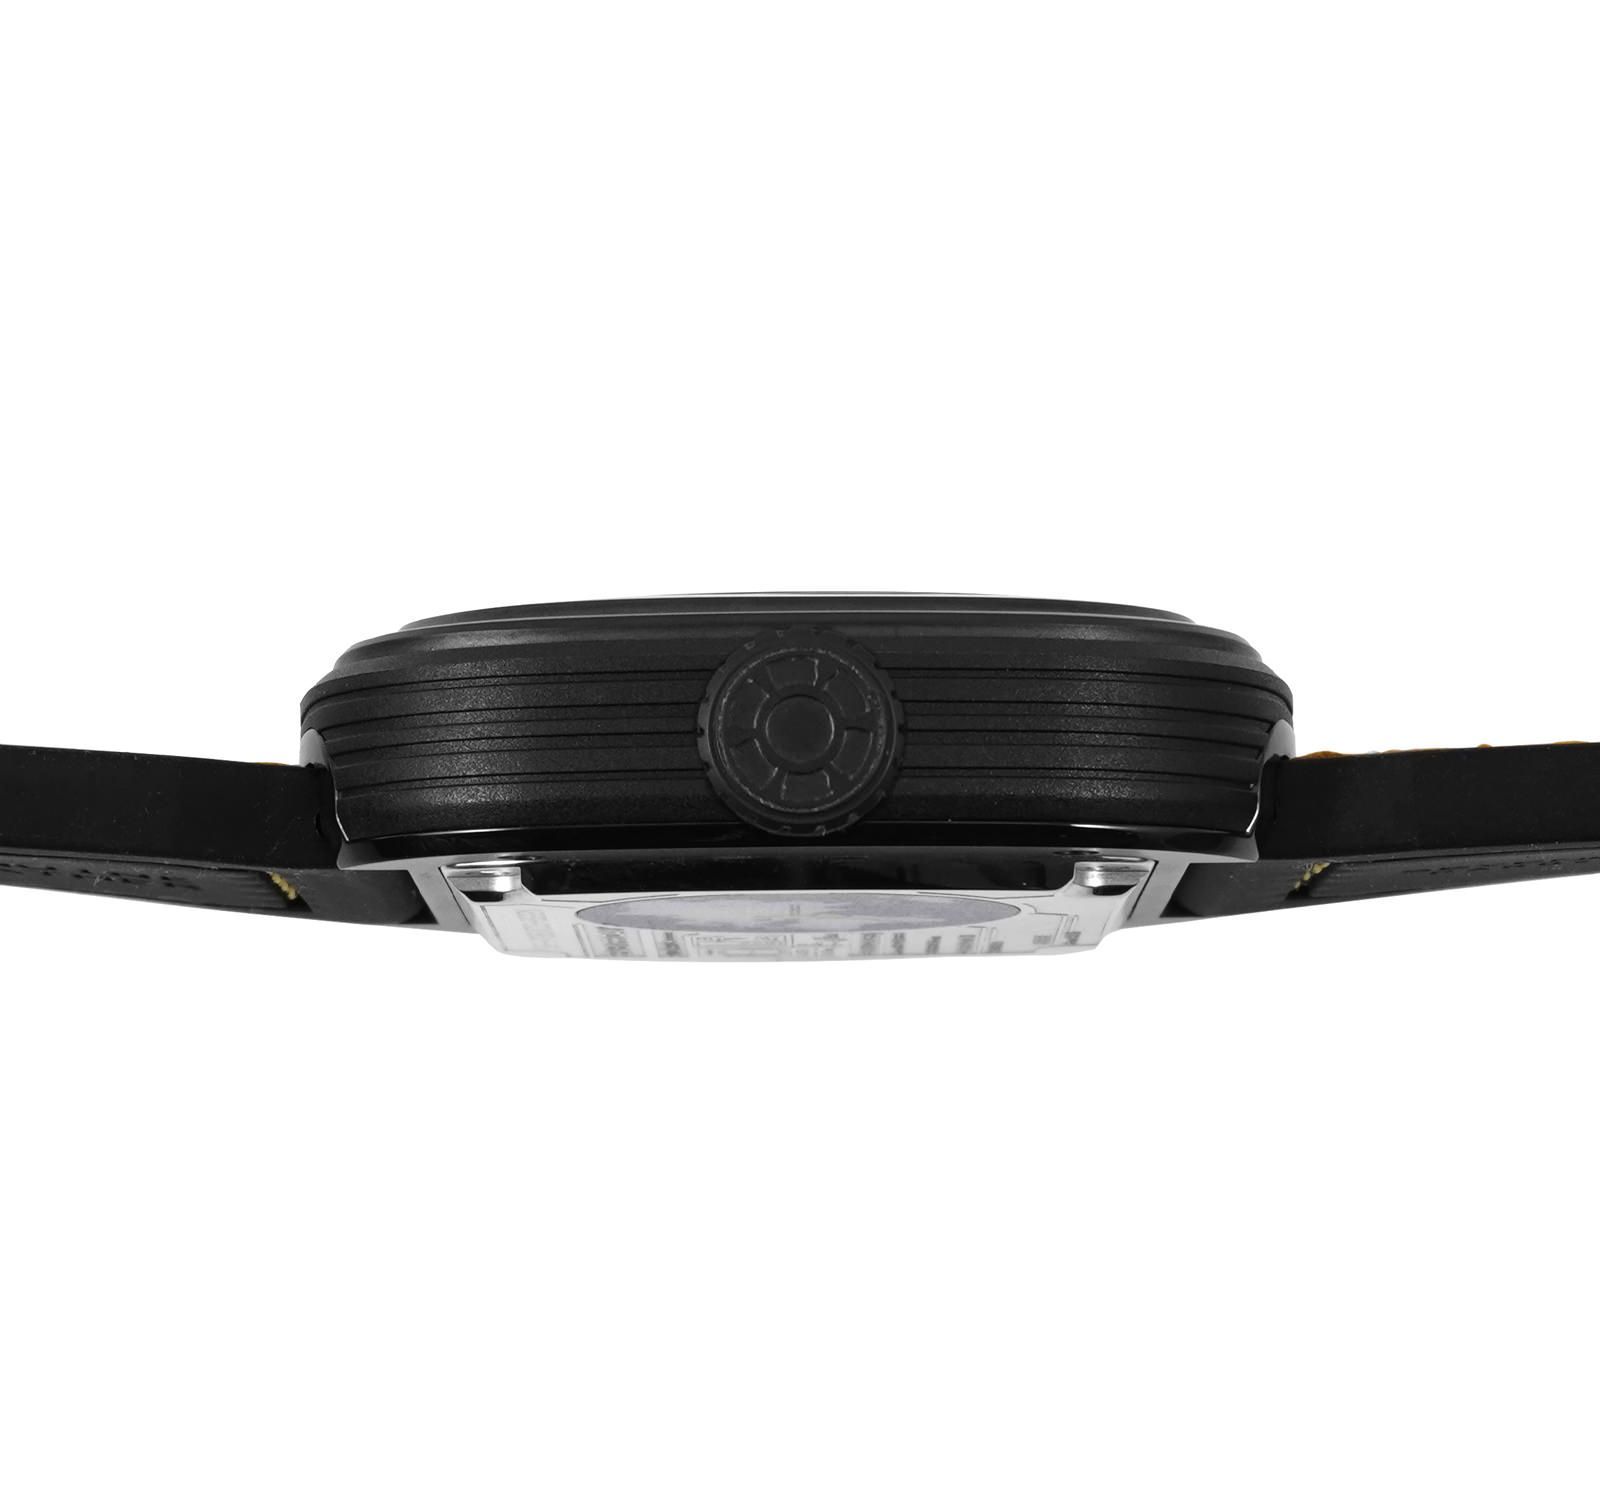 Pre-Owned Sevenfriday P-Series Price